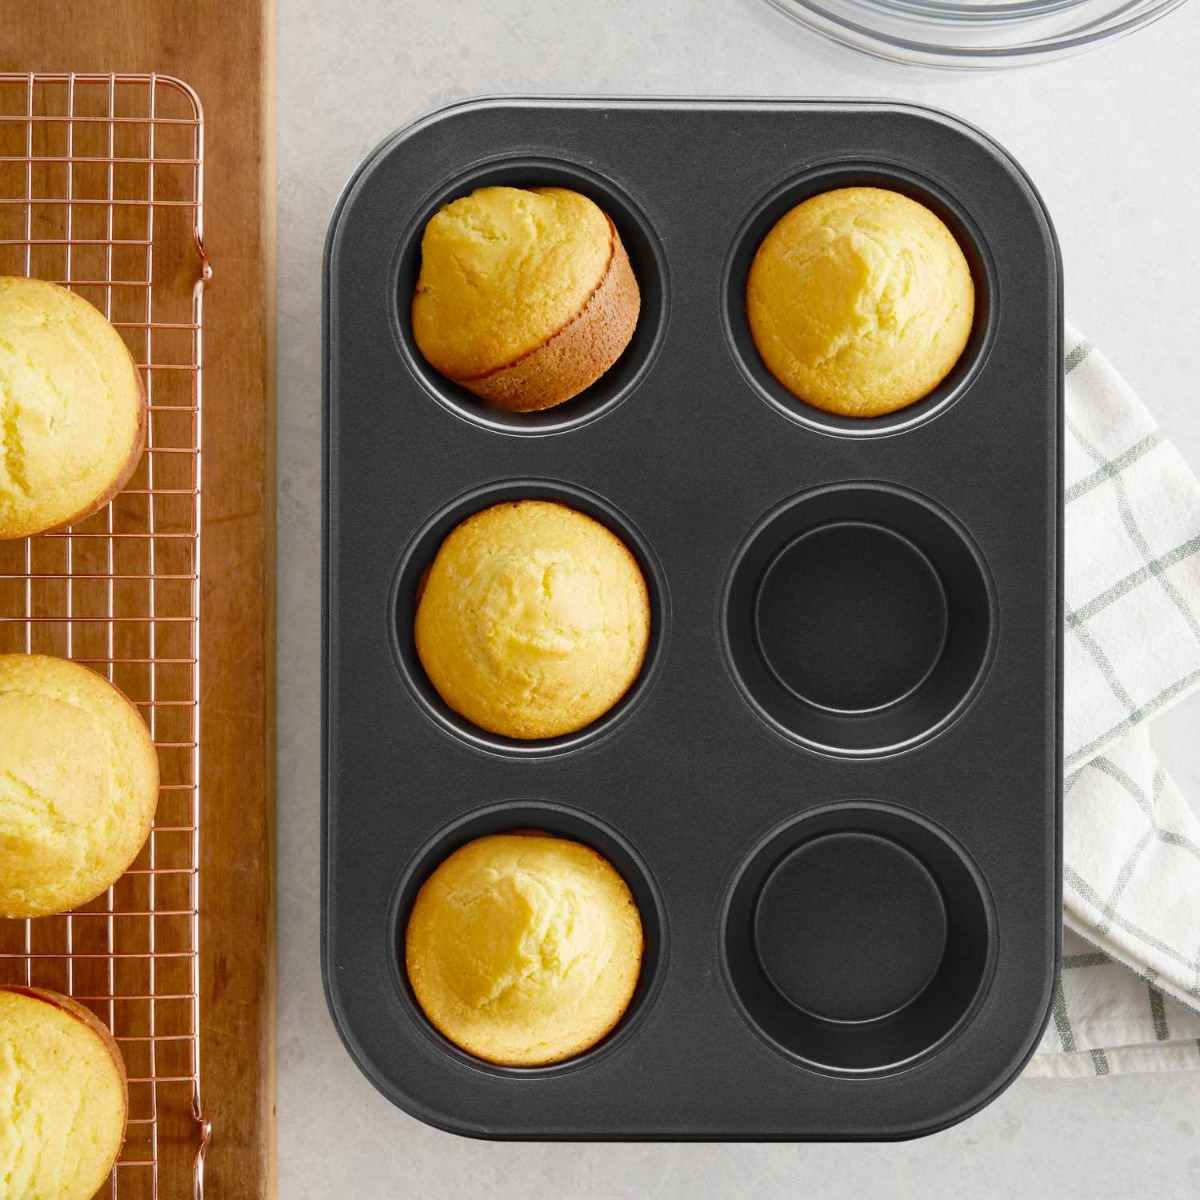  30 Piece Silicone Bakeware Set, Non-Stick Kitchen Oven Baking  Pans, Silicone Cake Molds with Muffin Pan, Round Cake Pan, Donut Pan,  Square Cake Pan, Loaf Pan, Pizza Pan and 24 pcs